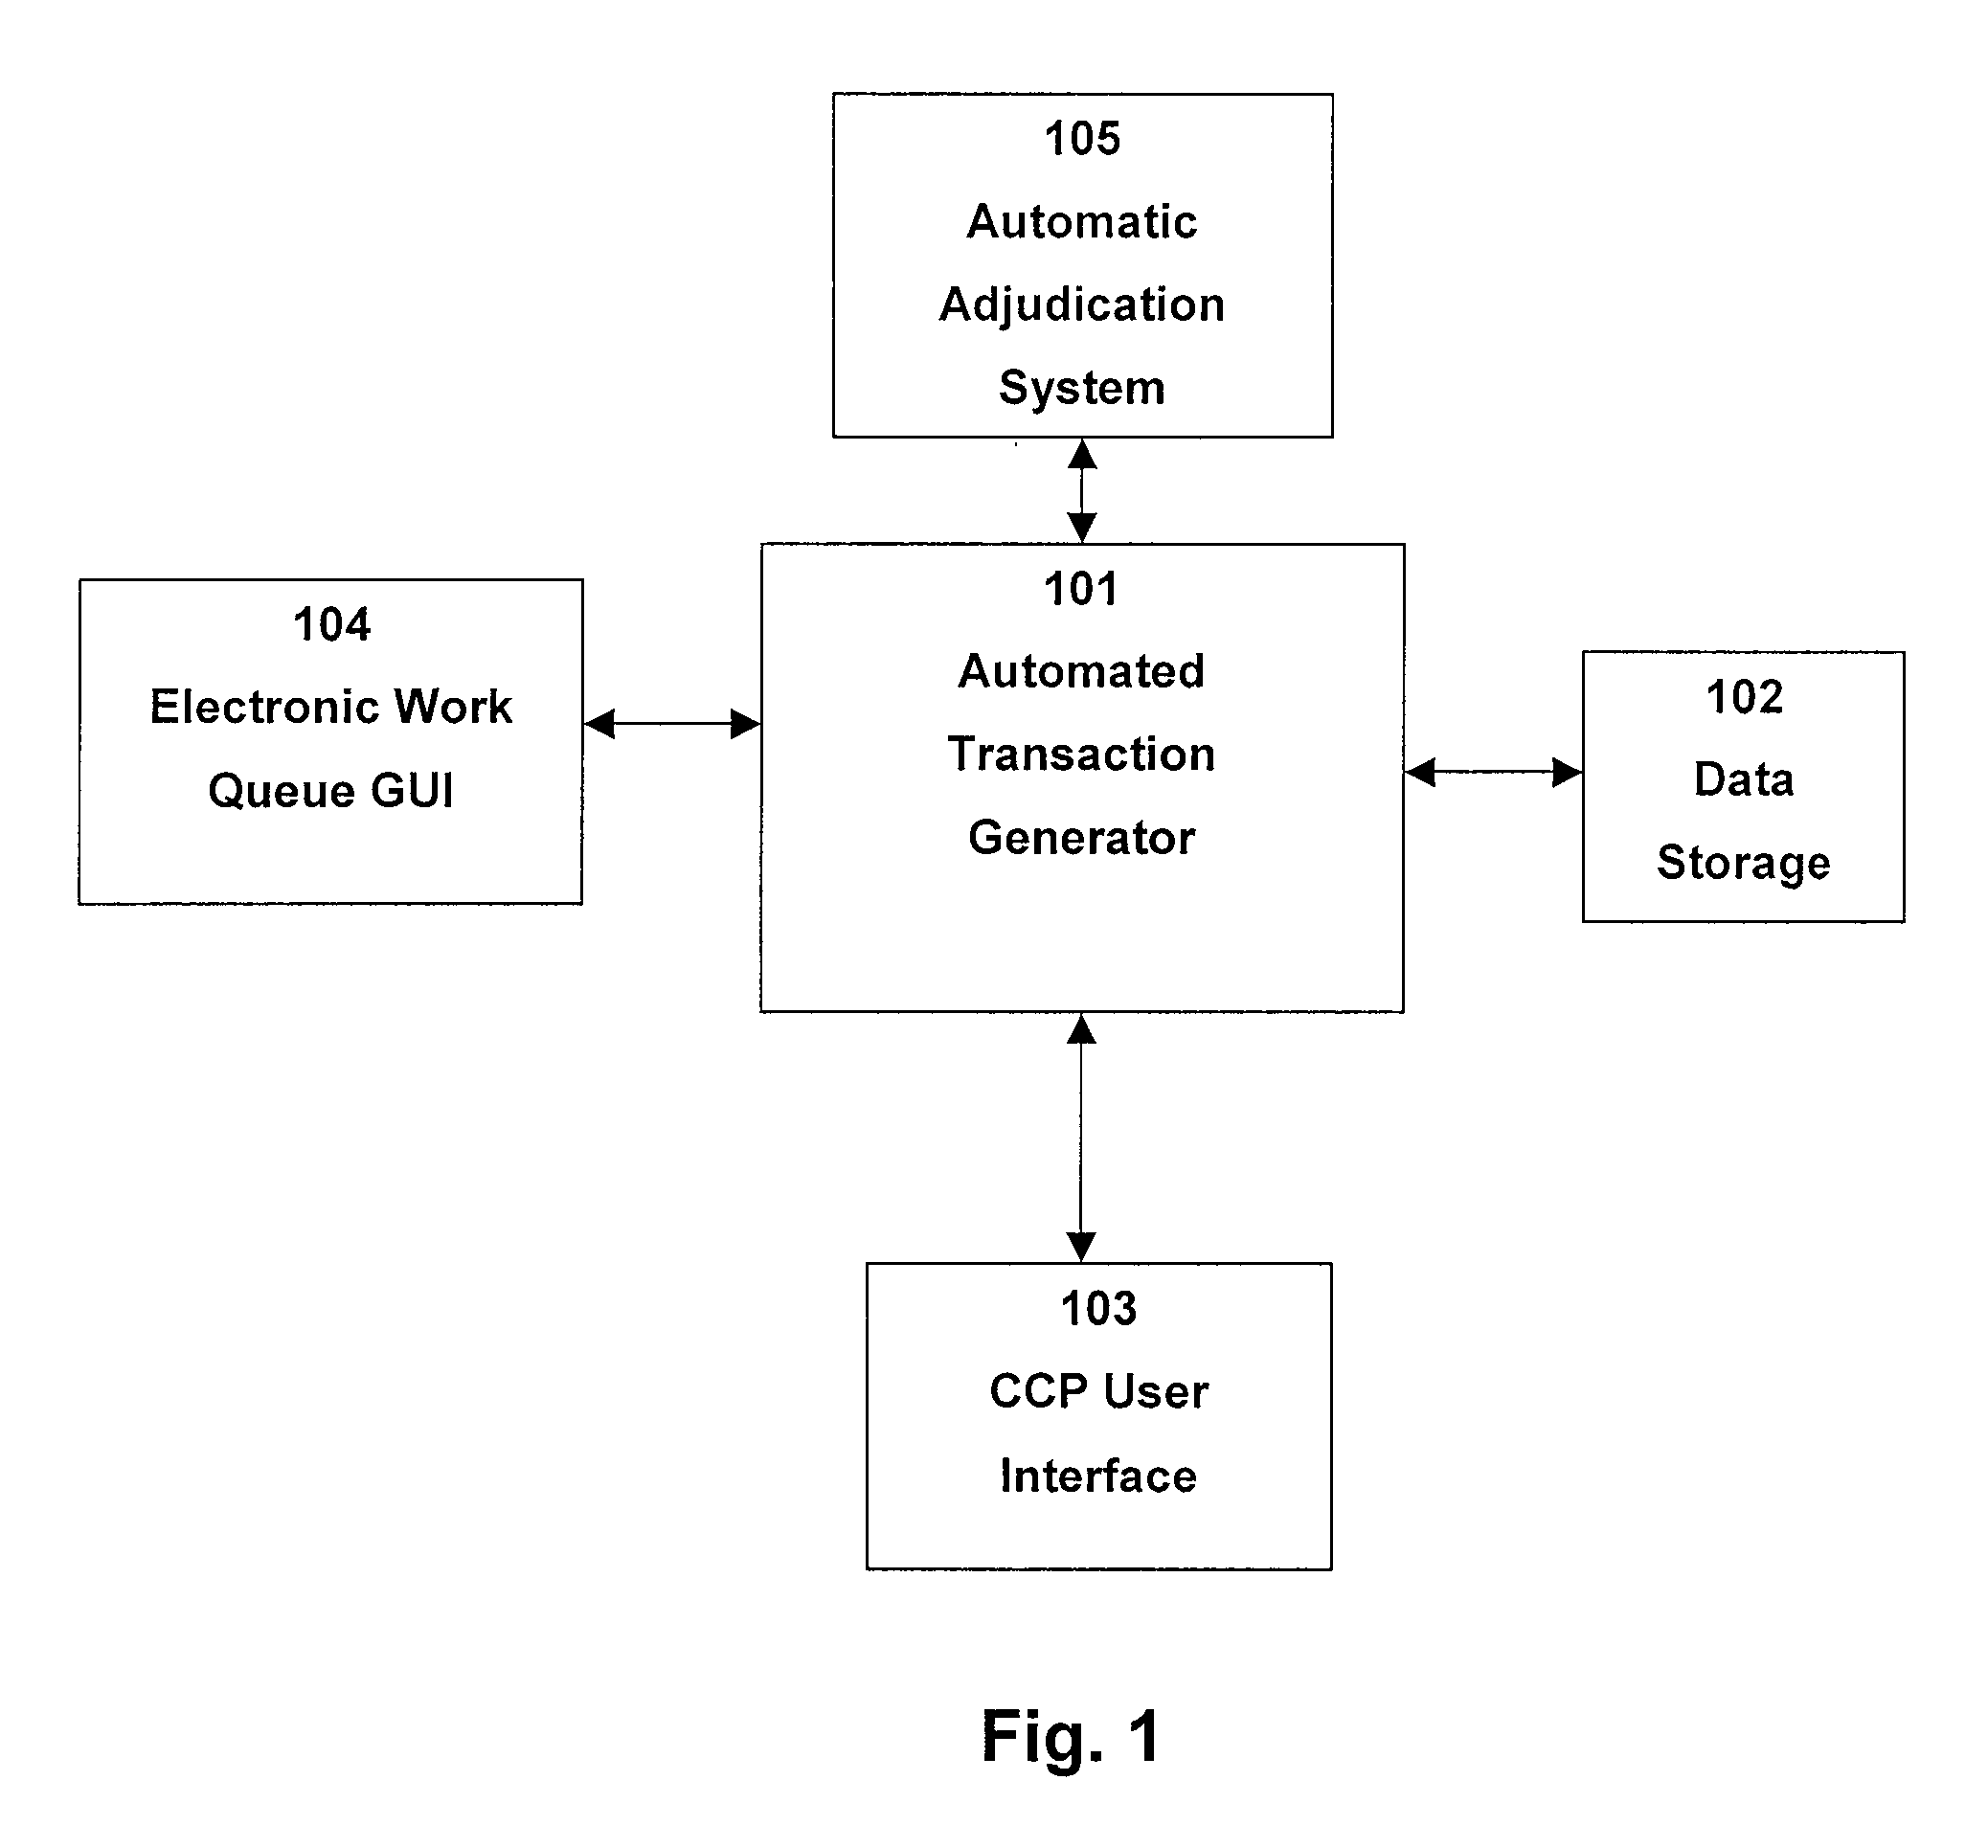 Method and System for Enabling Automatic Insurance Claim Processing